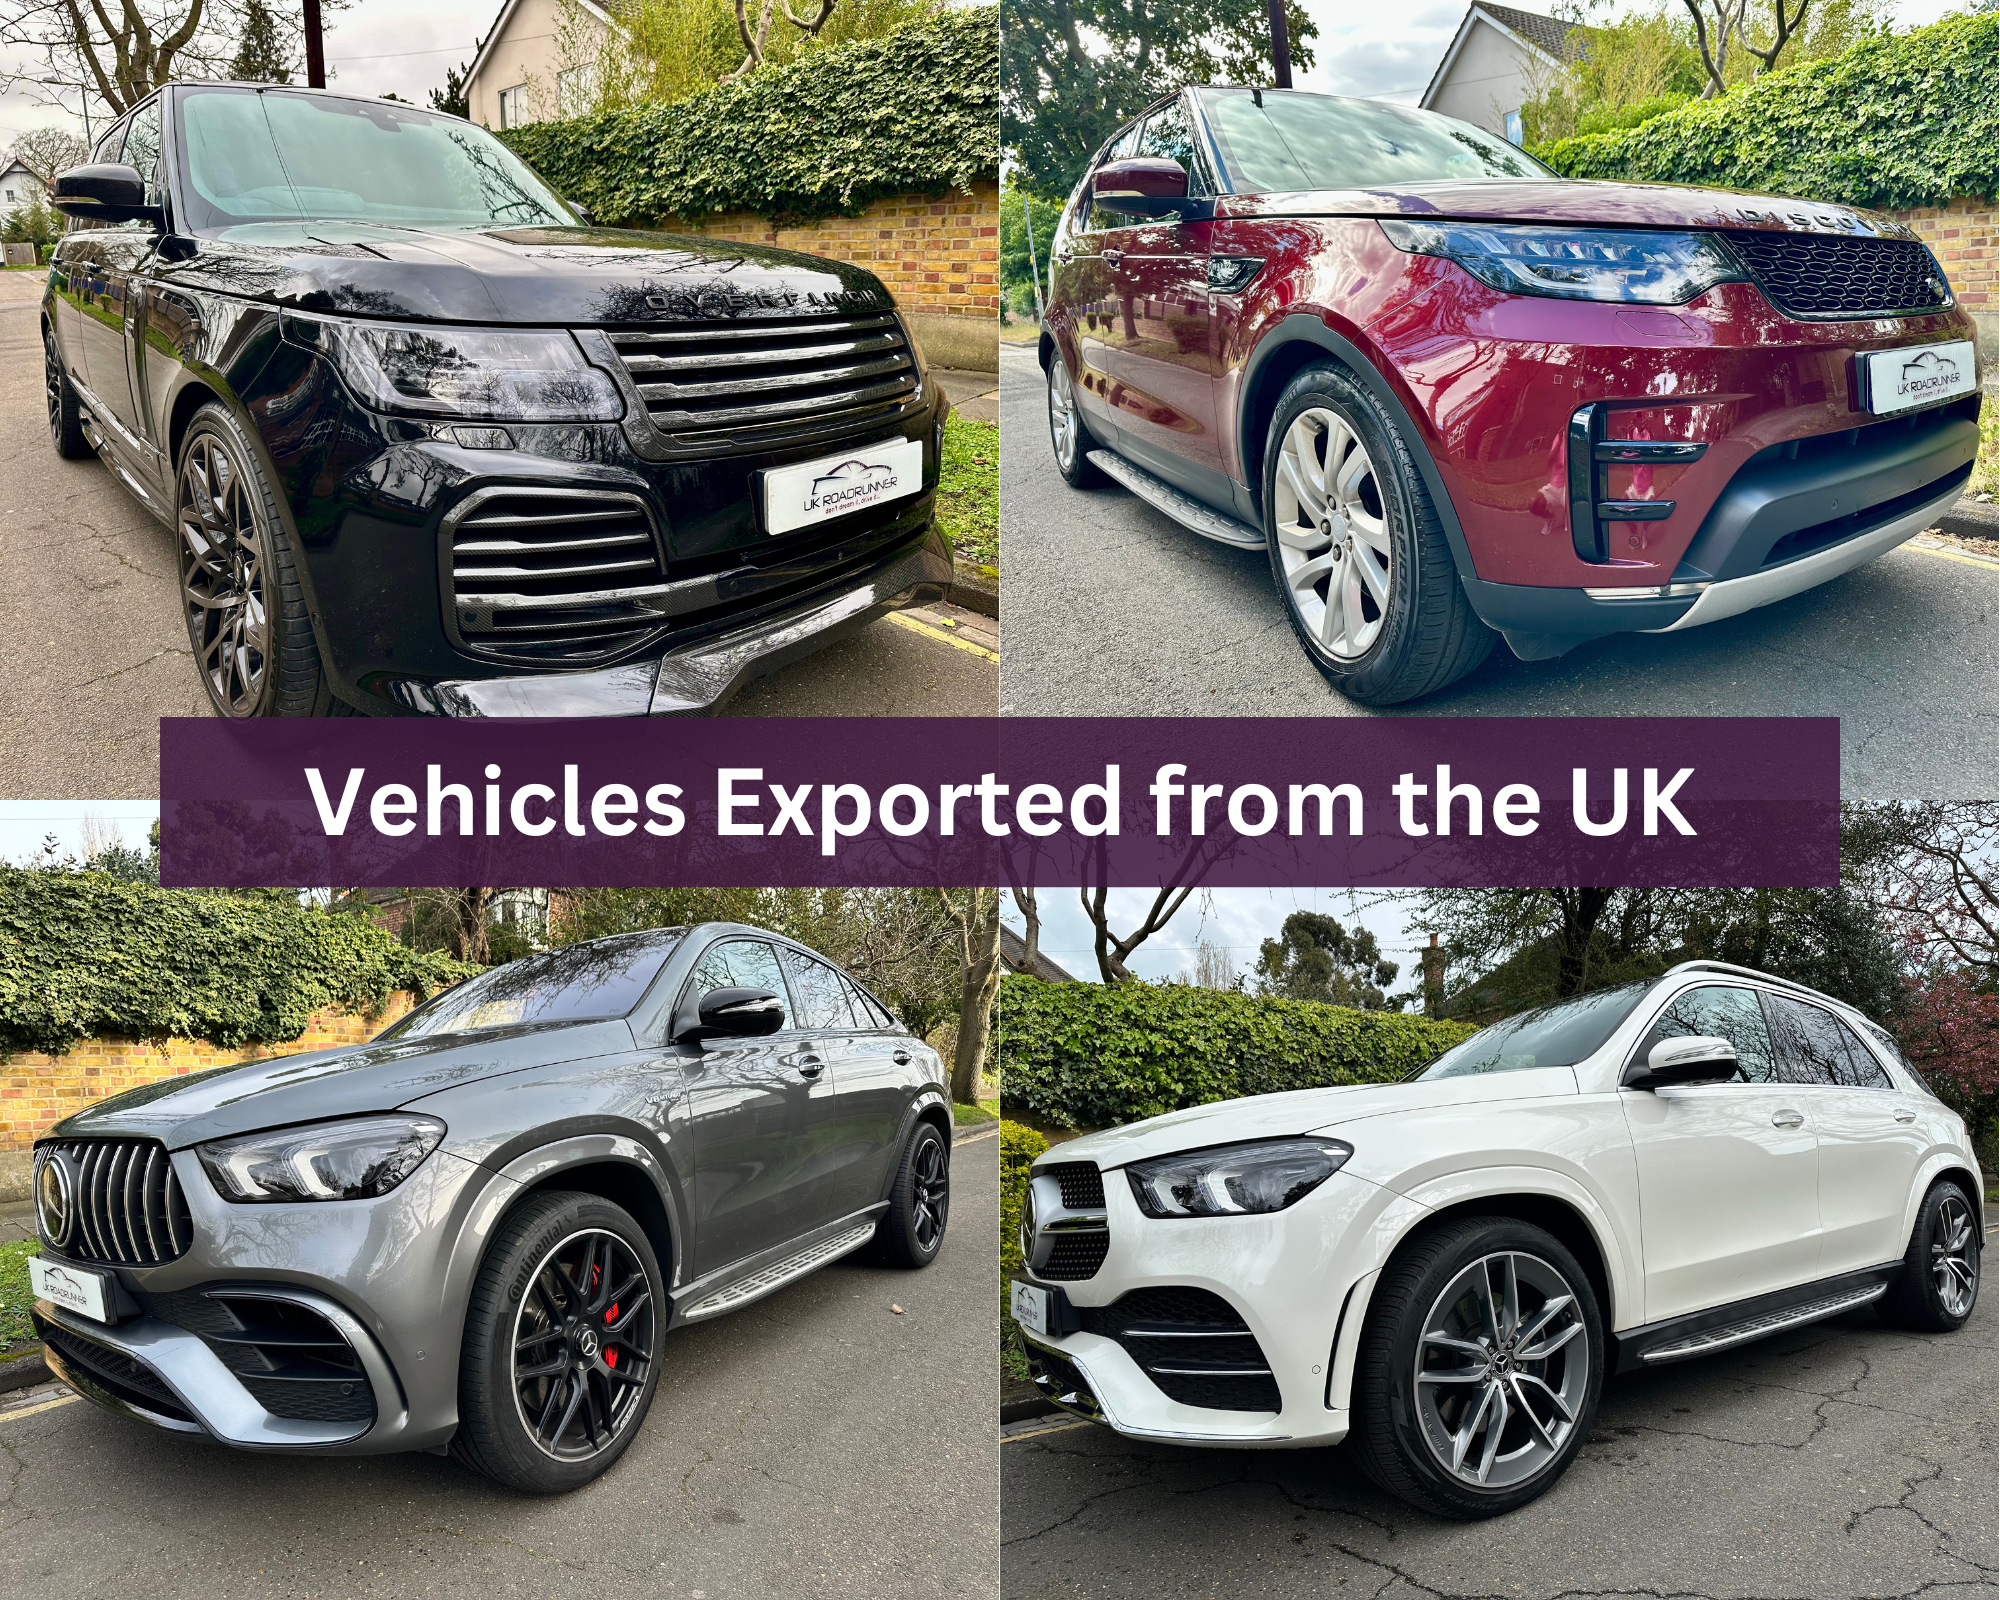 TOP CAR BRANDS TO IMPORT FROM THE UK 2 - Industry news and trends